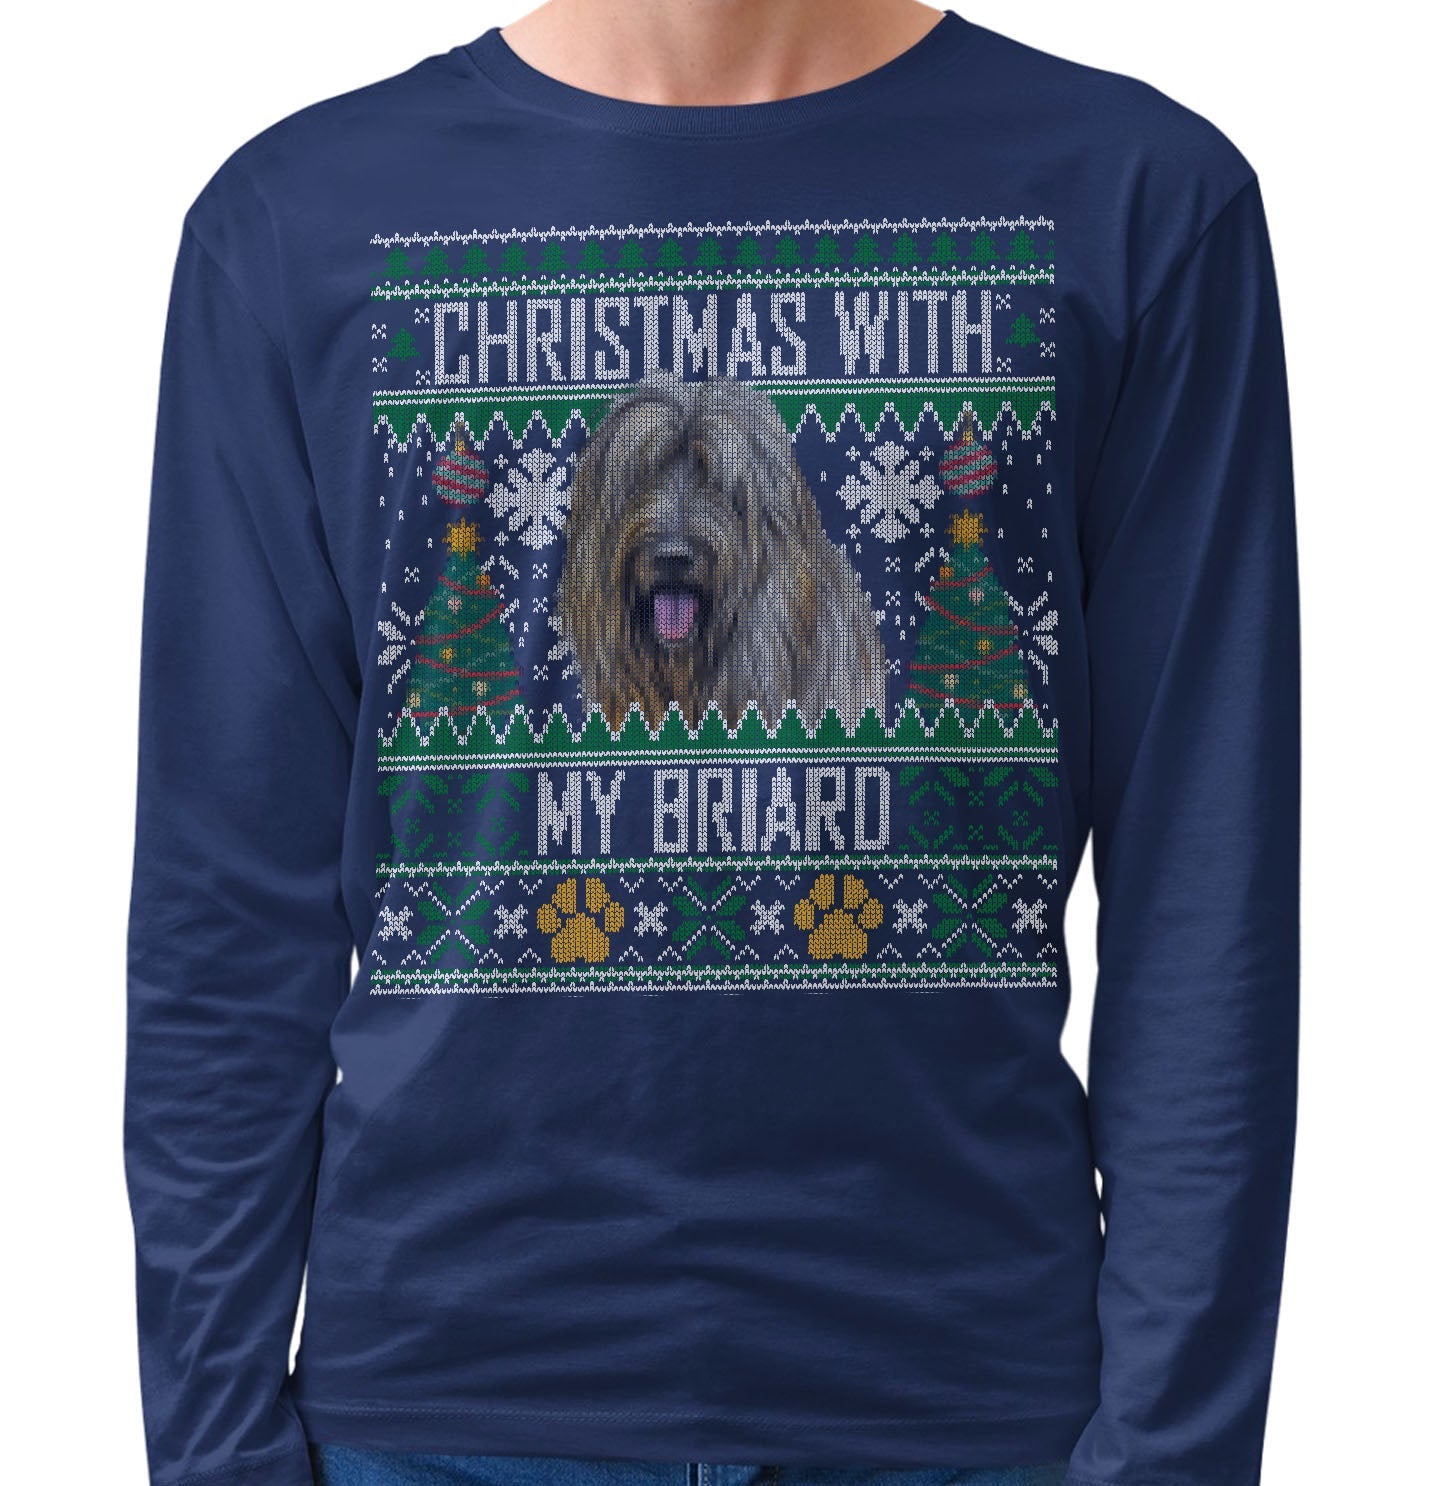 Ugly Sweater Christmas with My Briard - Adult Unisex Long Sleeve T-Shirt